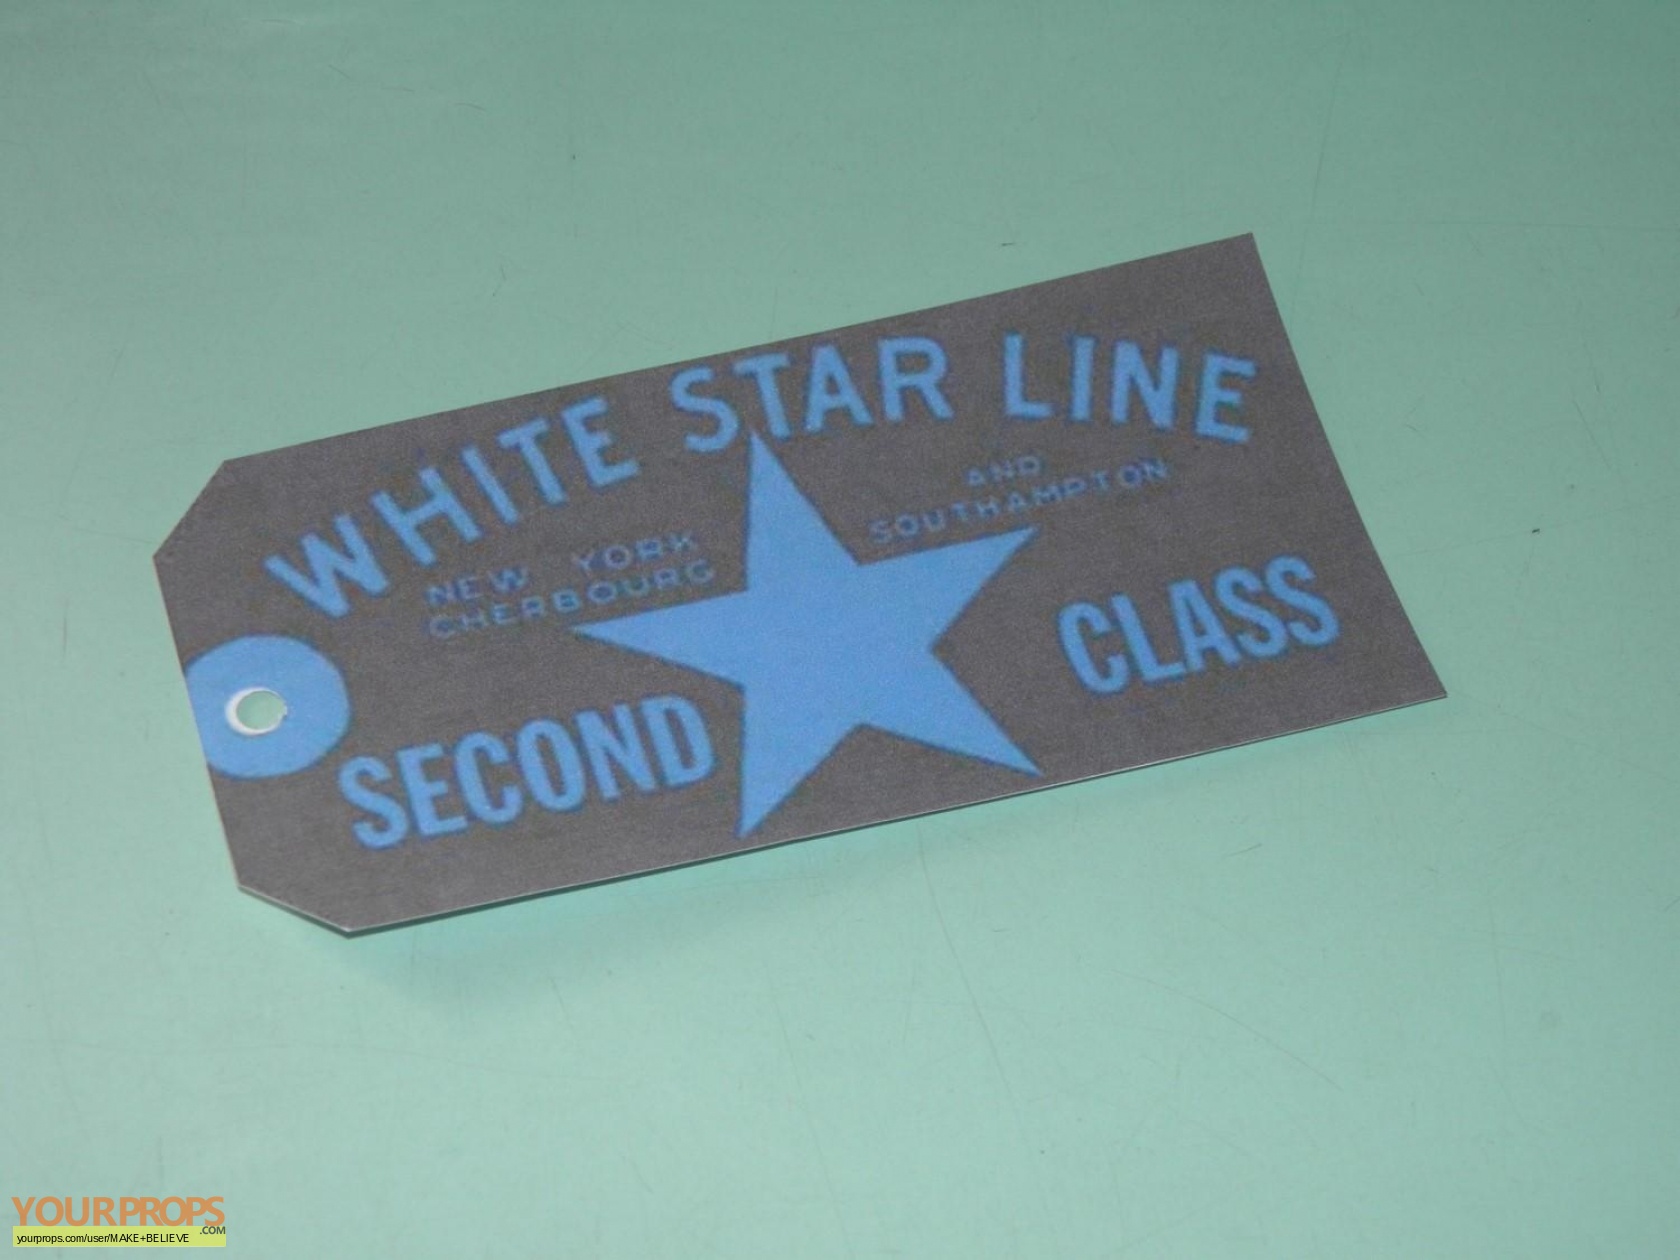 White Star Line Second Class Luggage Tag